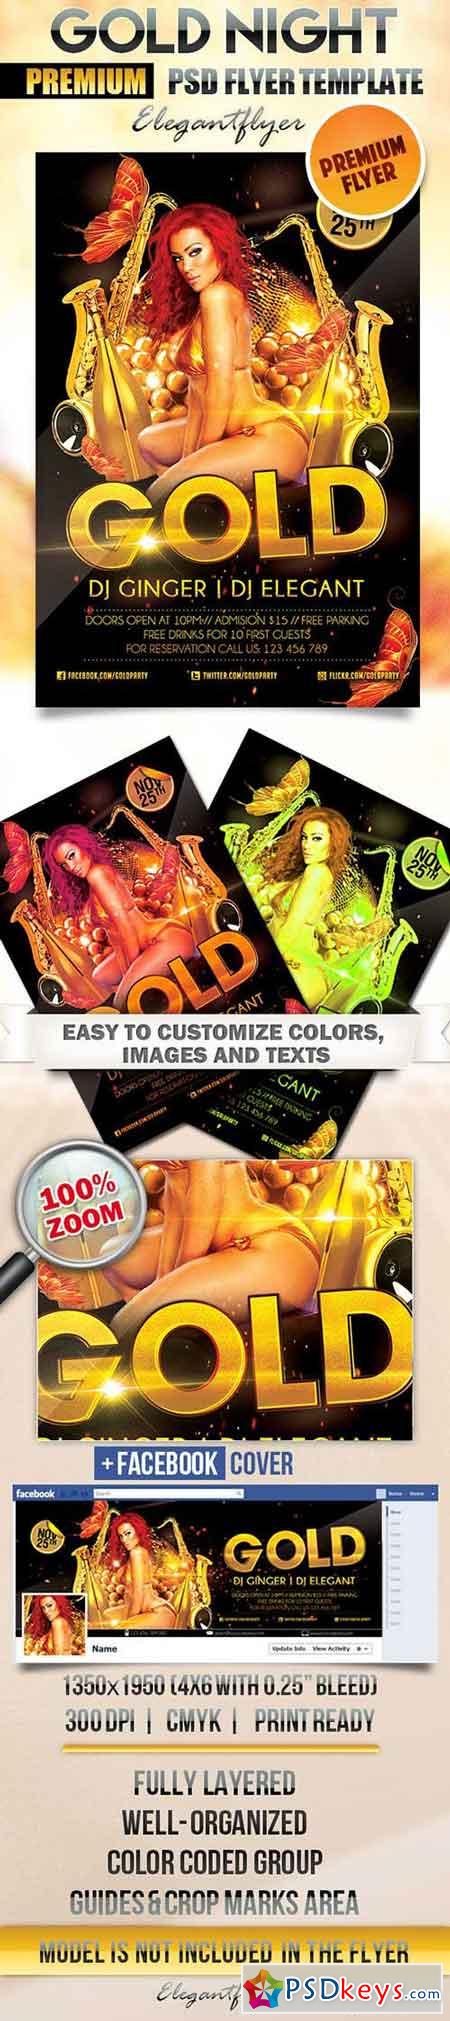 Gold Night Flyer PSD Template + Facebook Cover